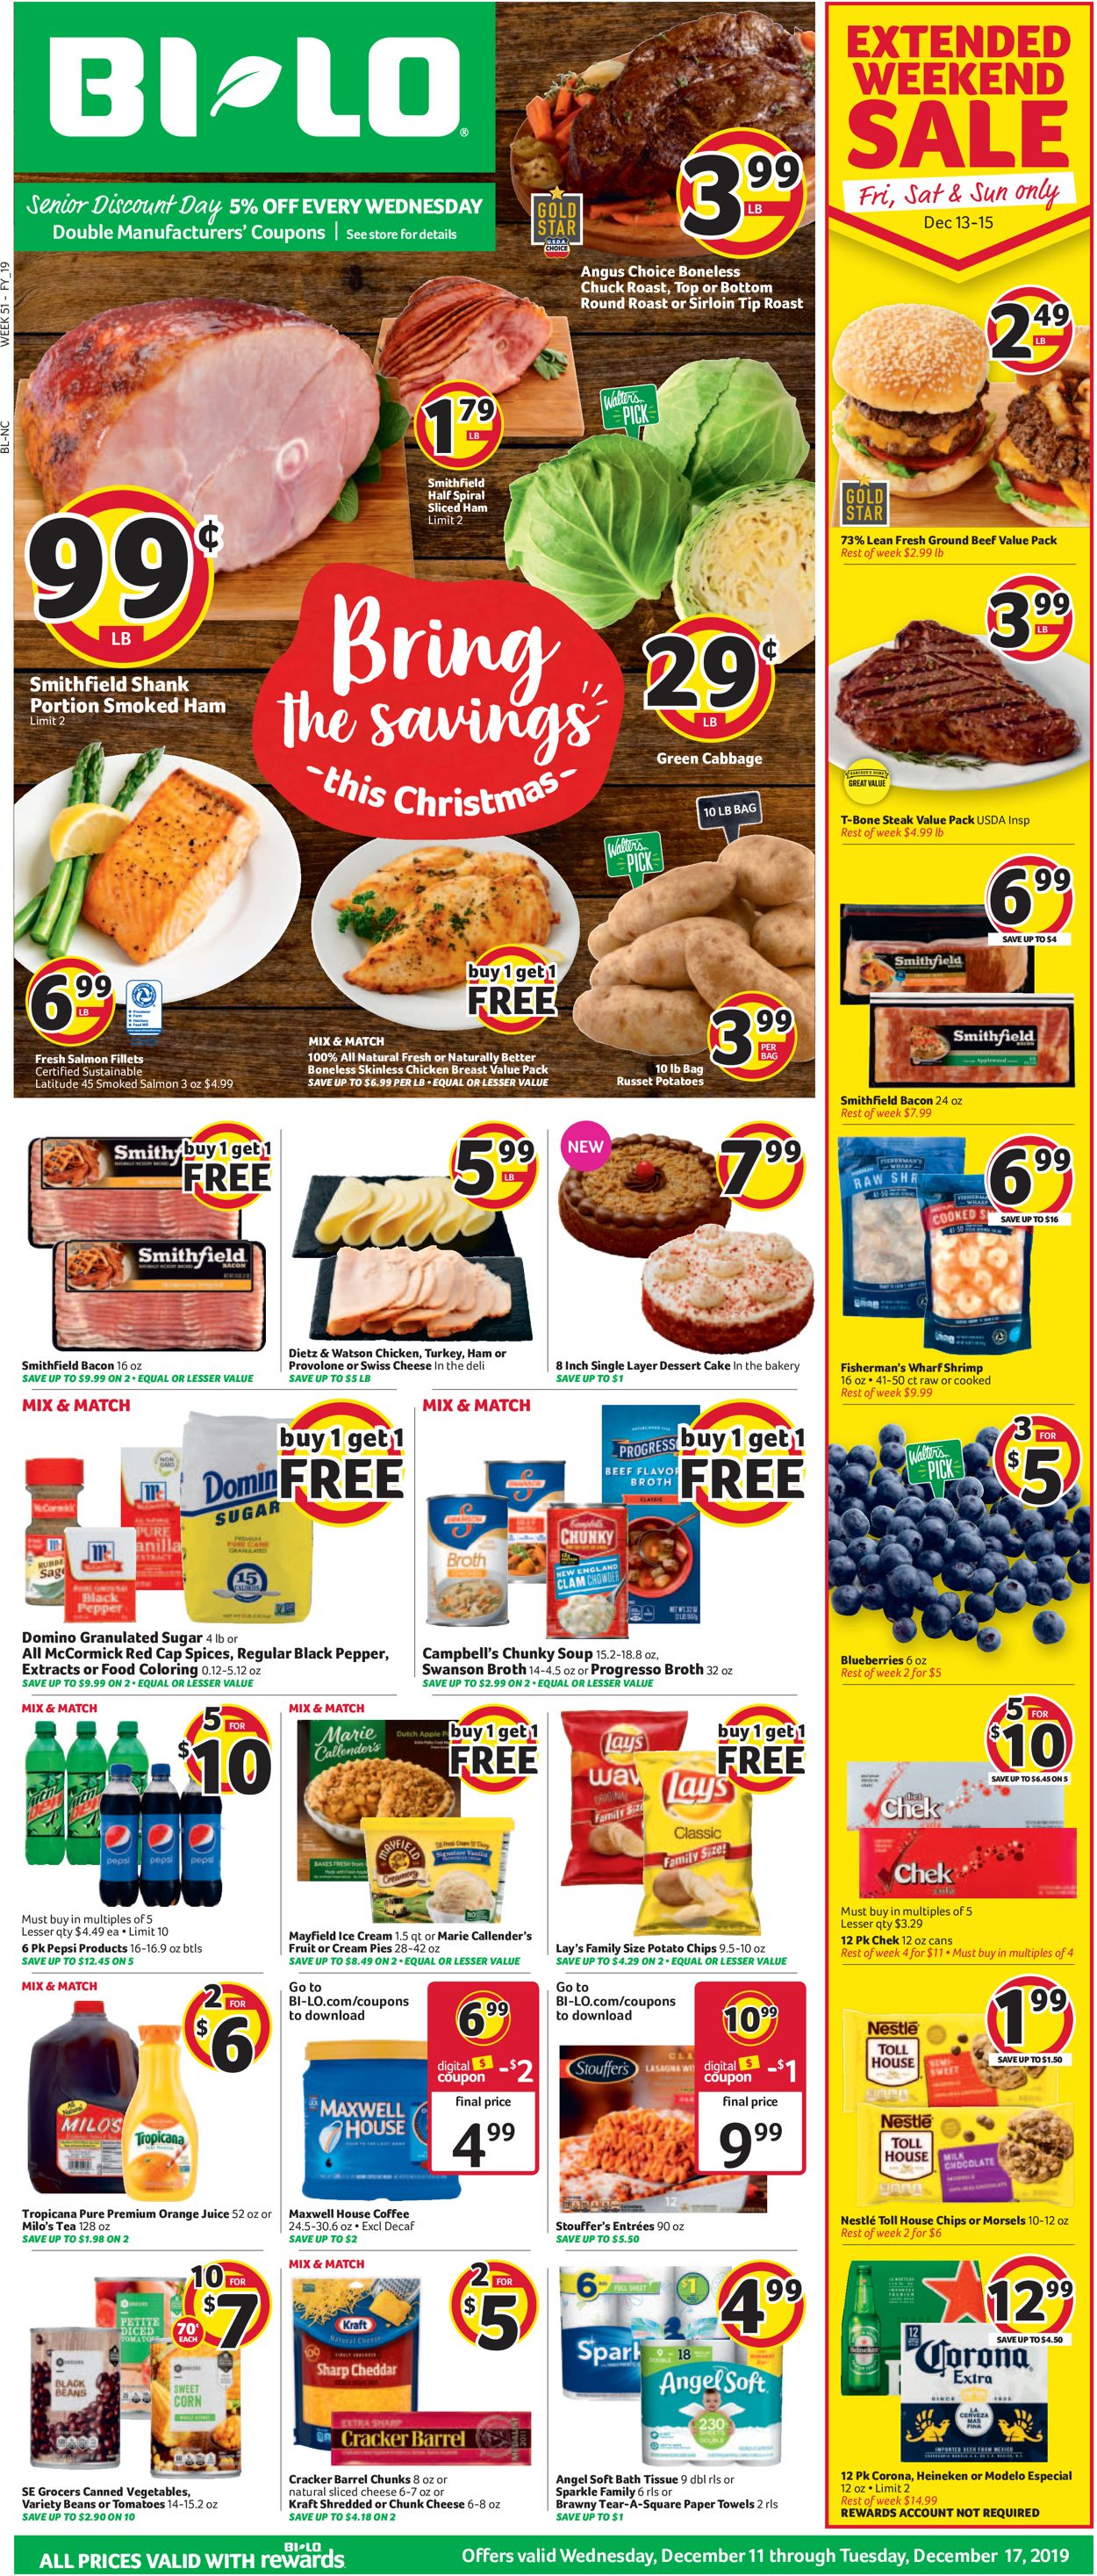 BI-LO Current weekly ad 12/11 - 12/17/2019 - frequent-ads.com